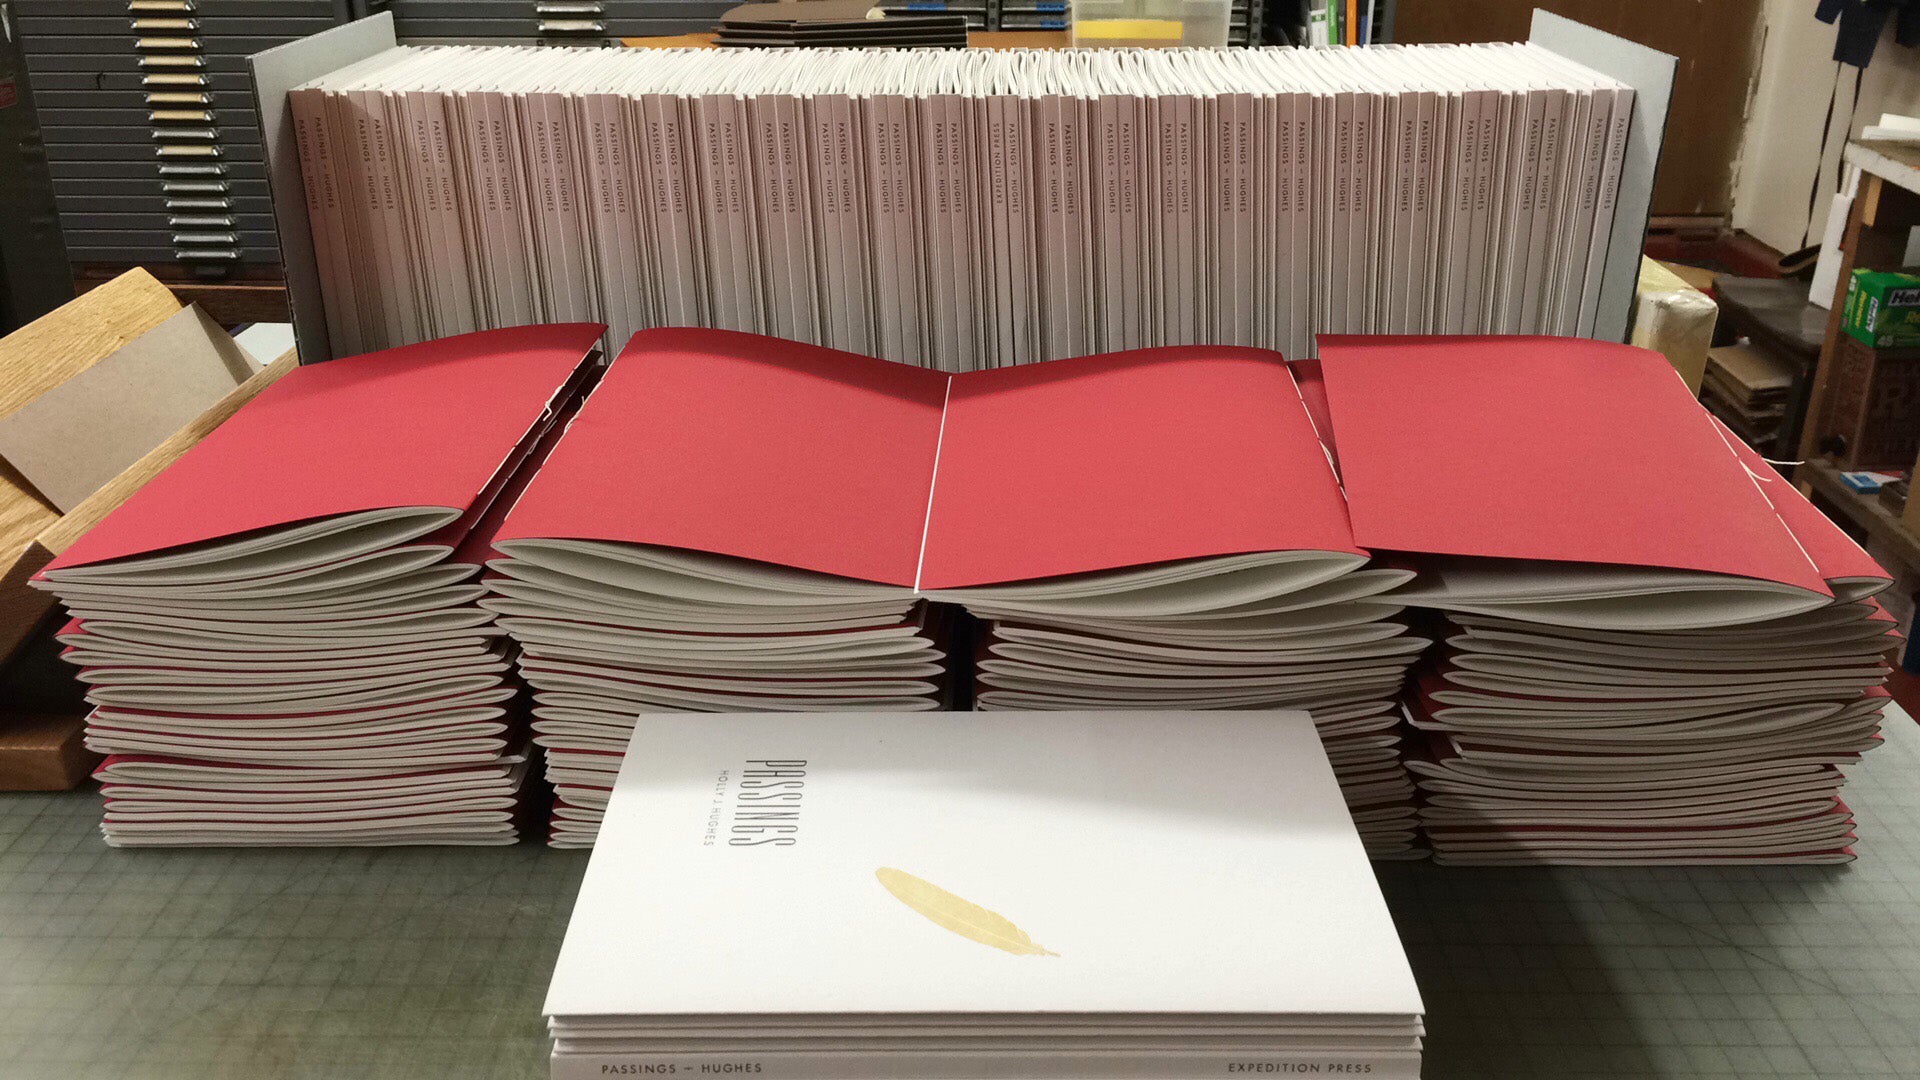 red insides of books with white covers behind